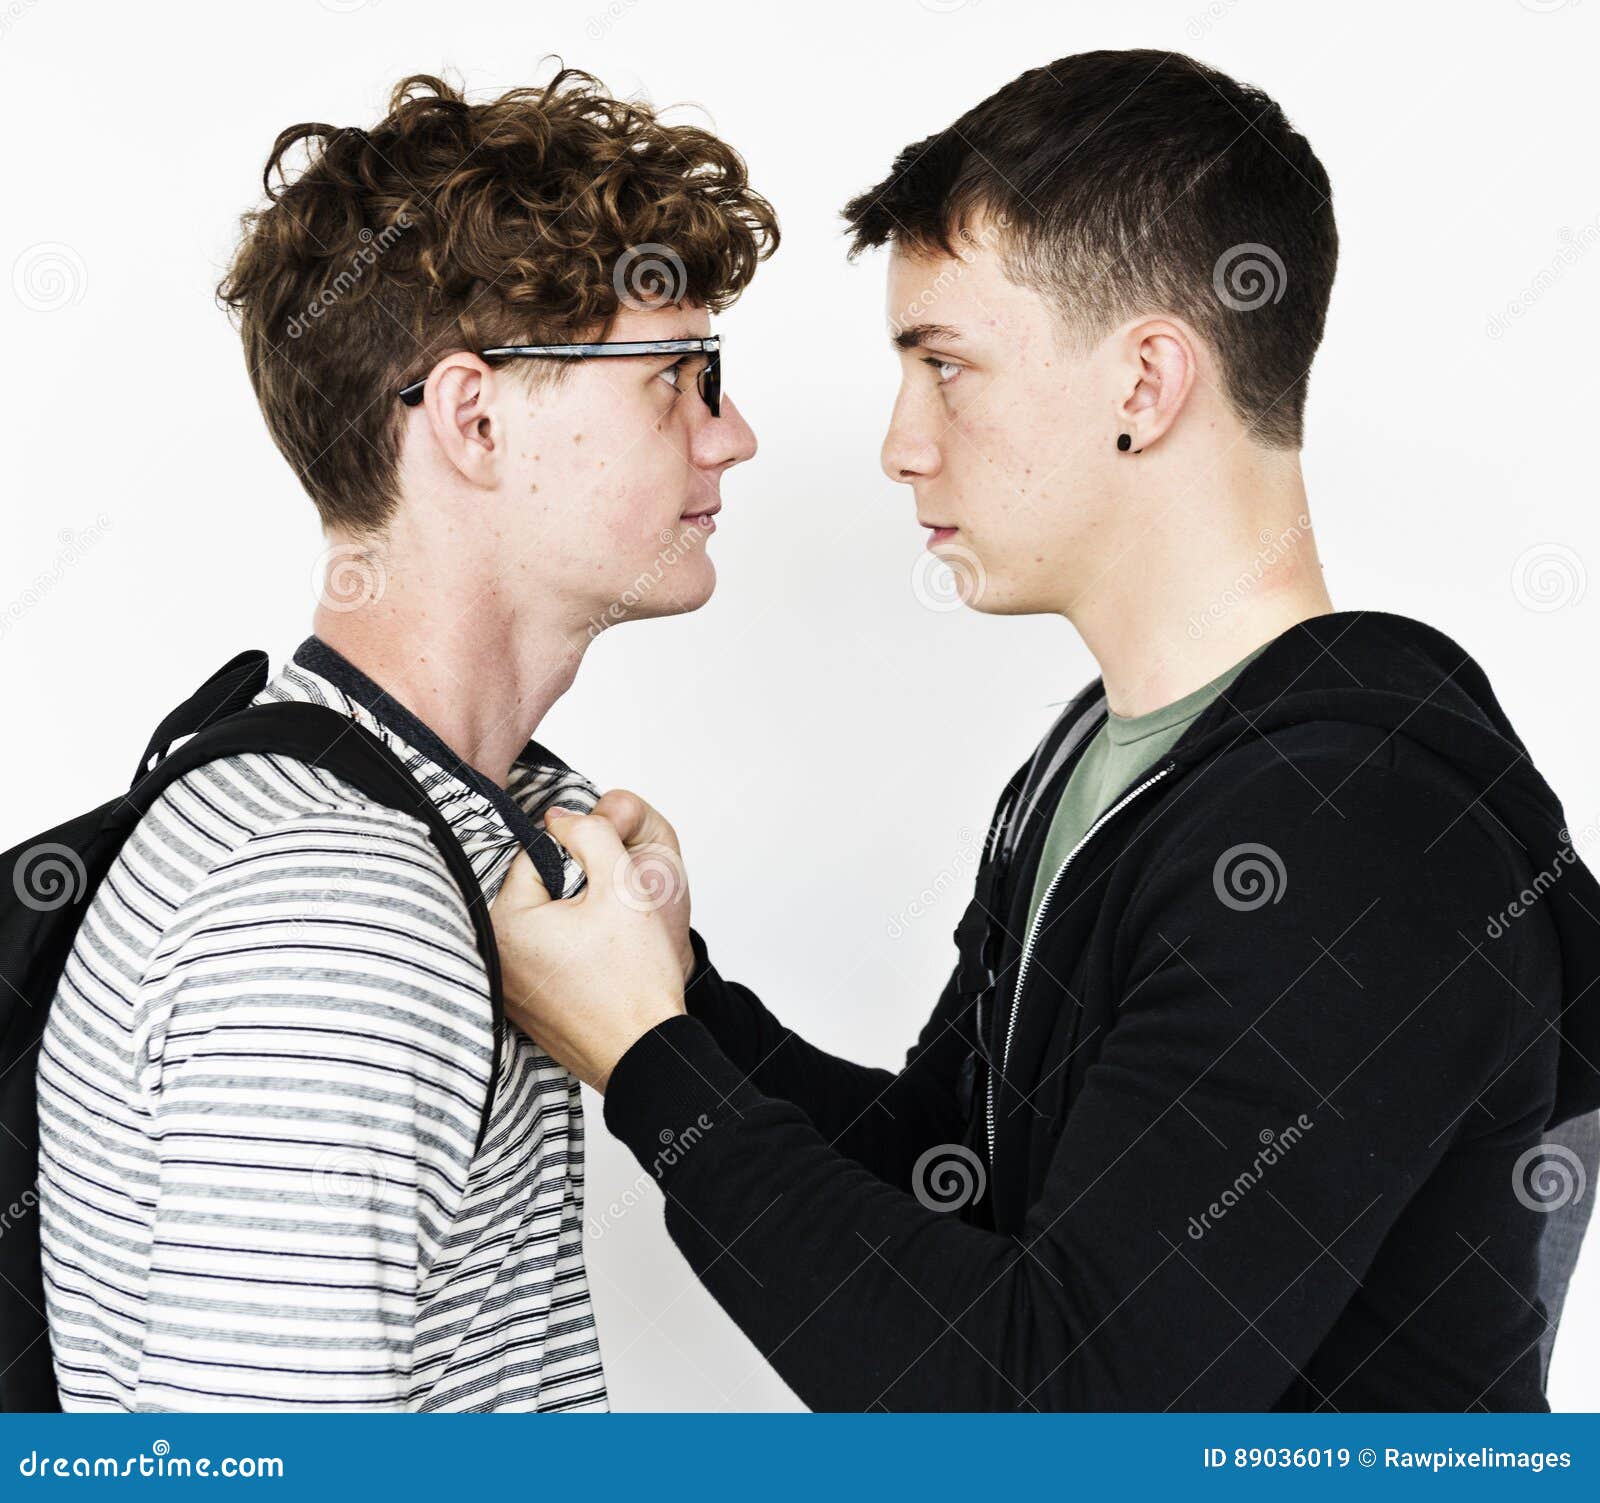 Teen Fight Anger Conflict Violence Aggression Stock Image